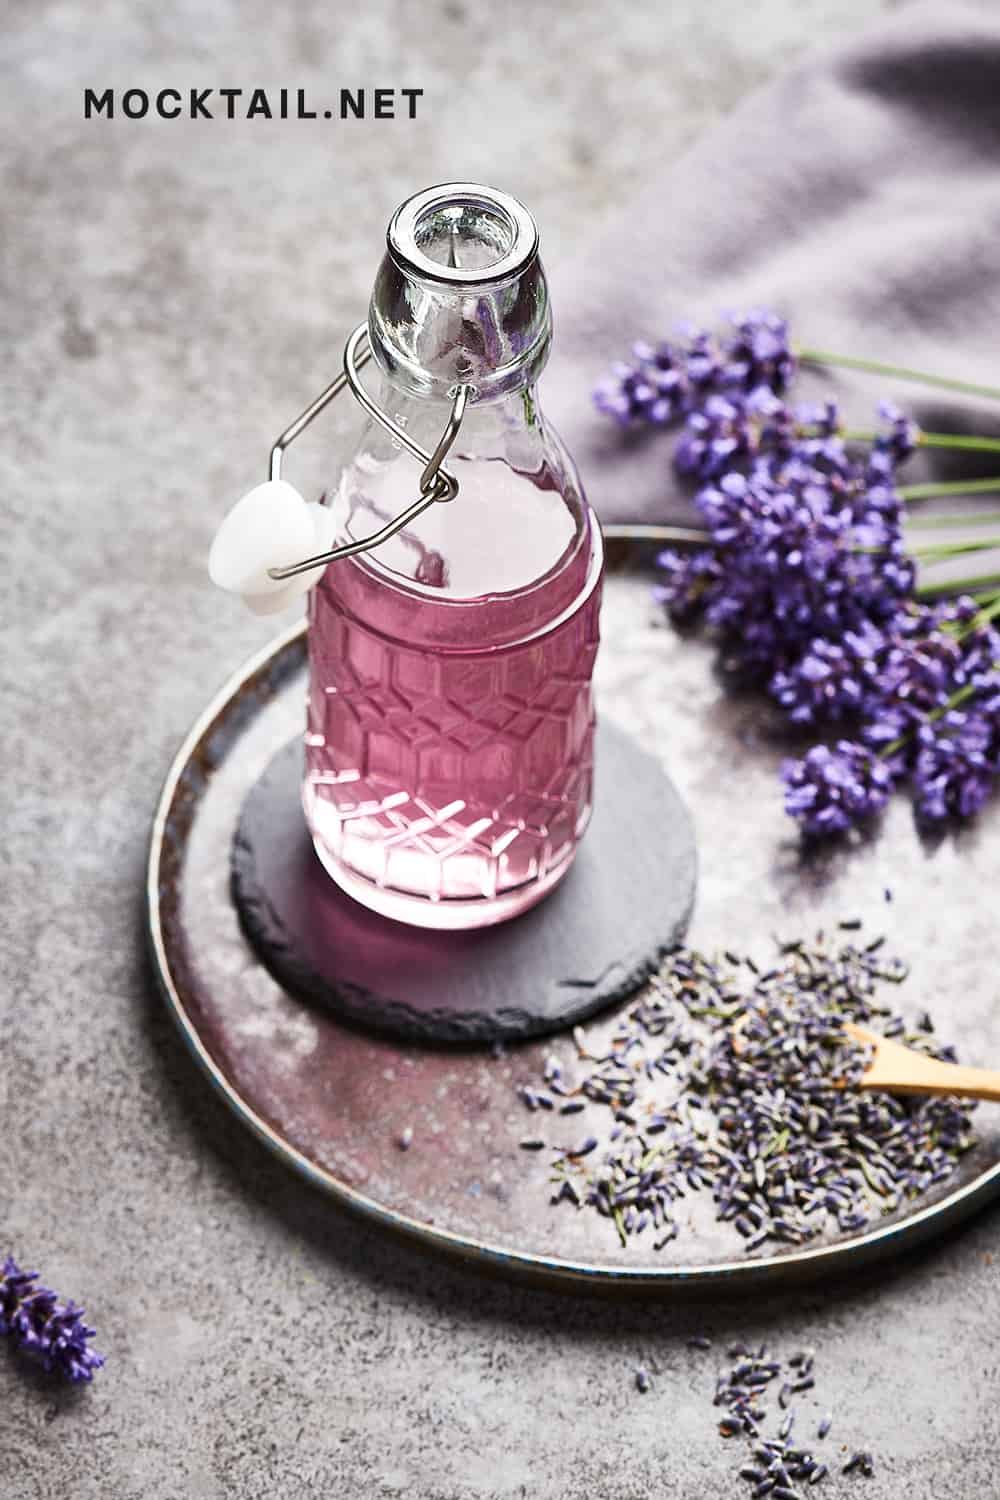 lavender syrup recipe is easy